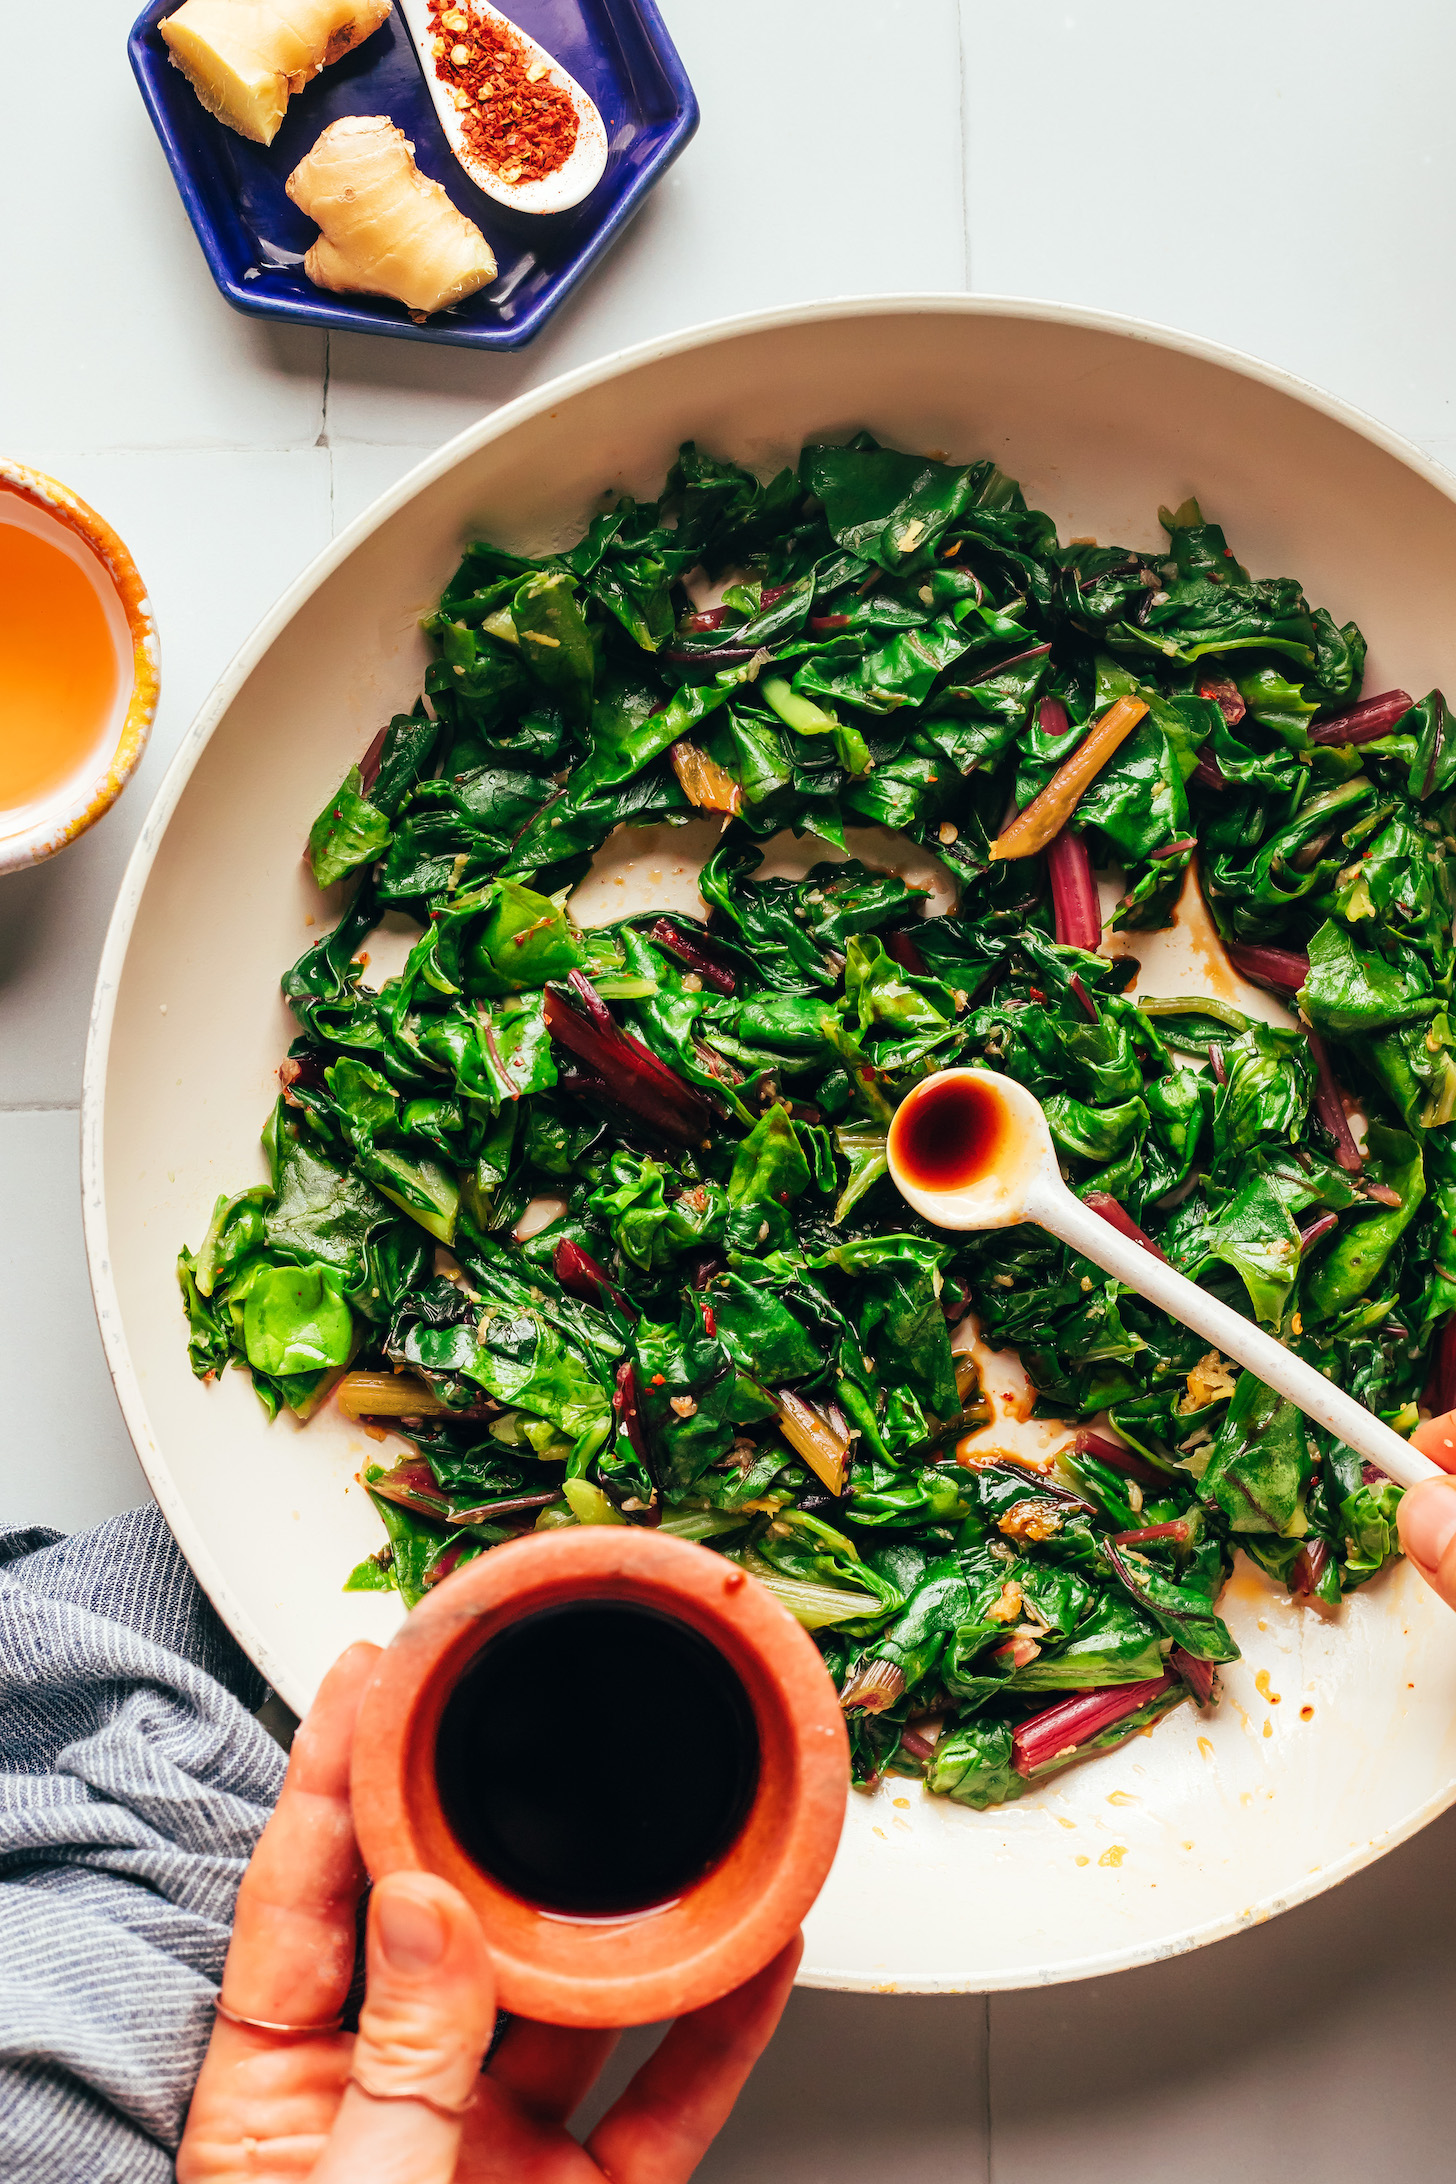 Adding tamari to greens for salty, Asian-inspired flavor